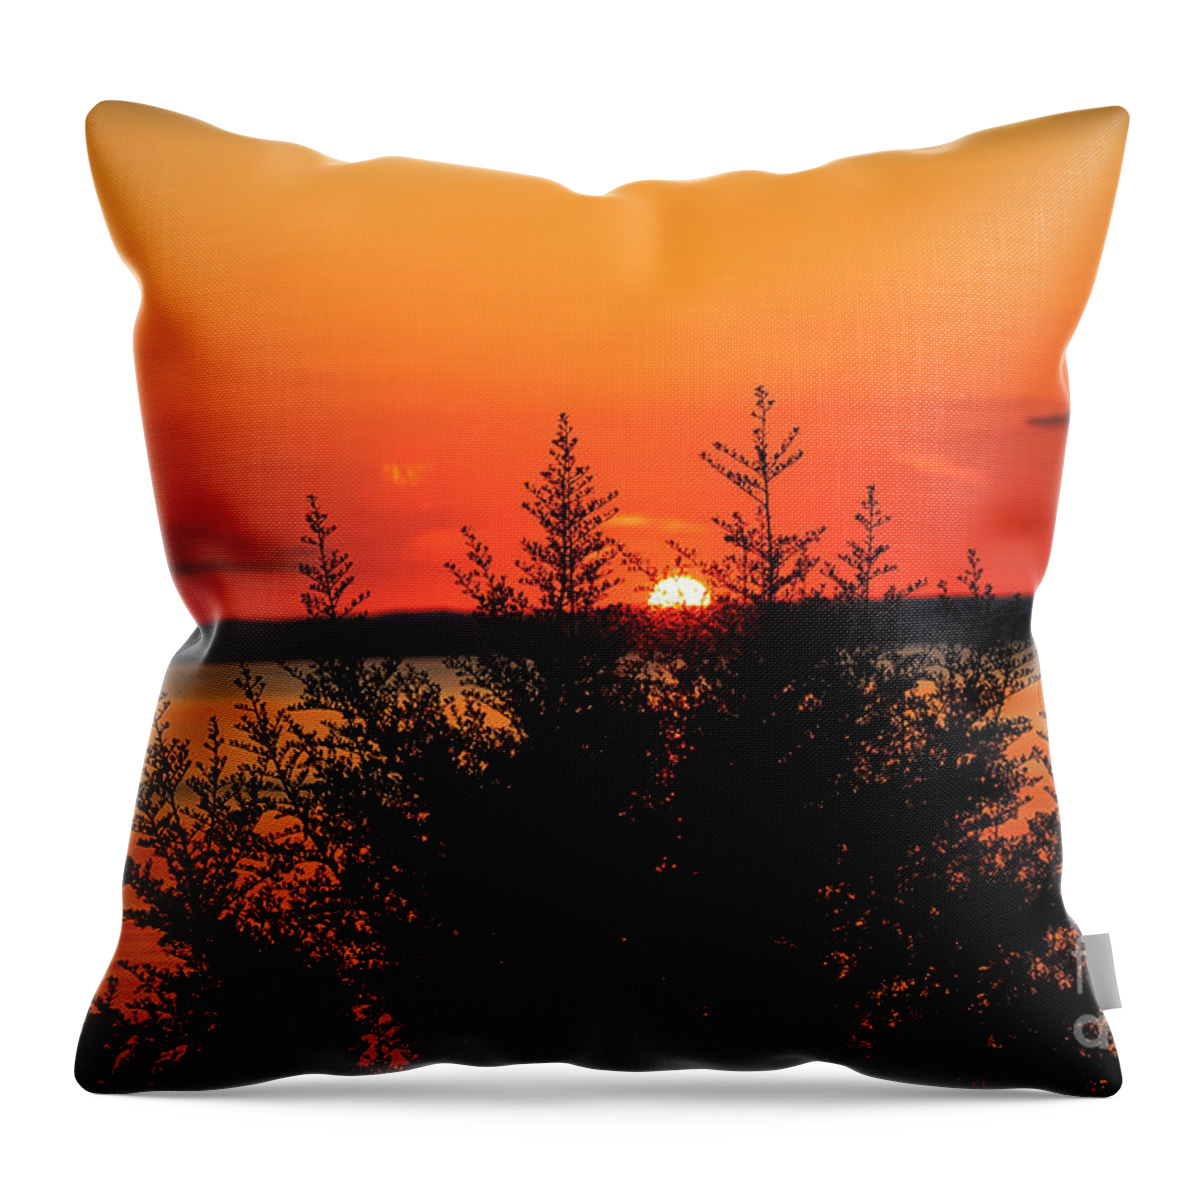 Sunset Throw Pillow featuring the photograph Magic At Sunset by Ella Kaye Dickey